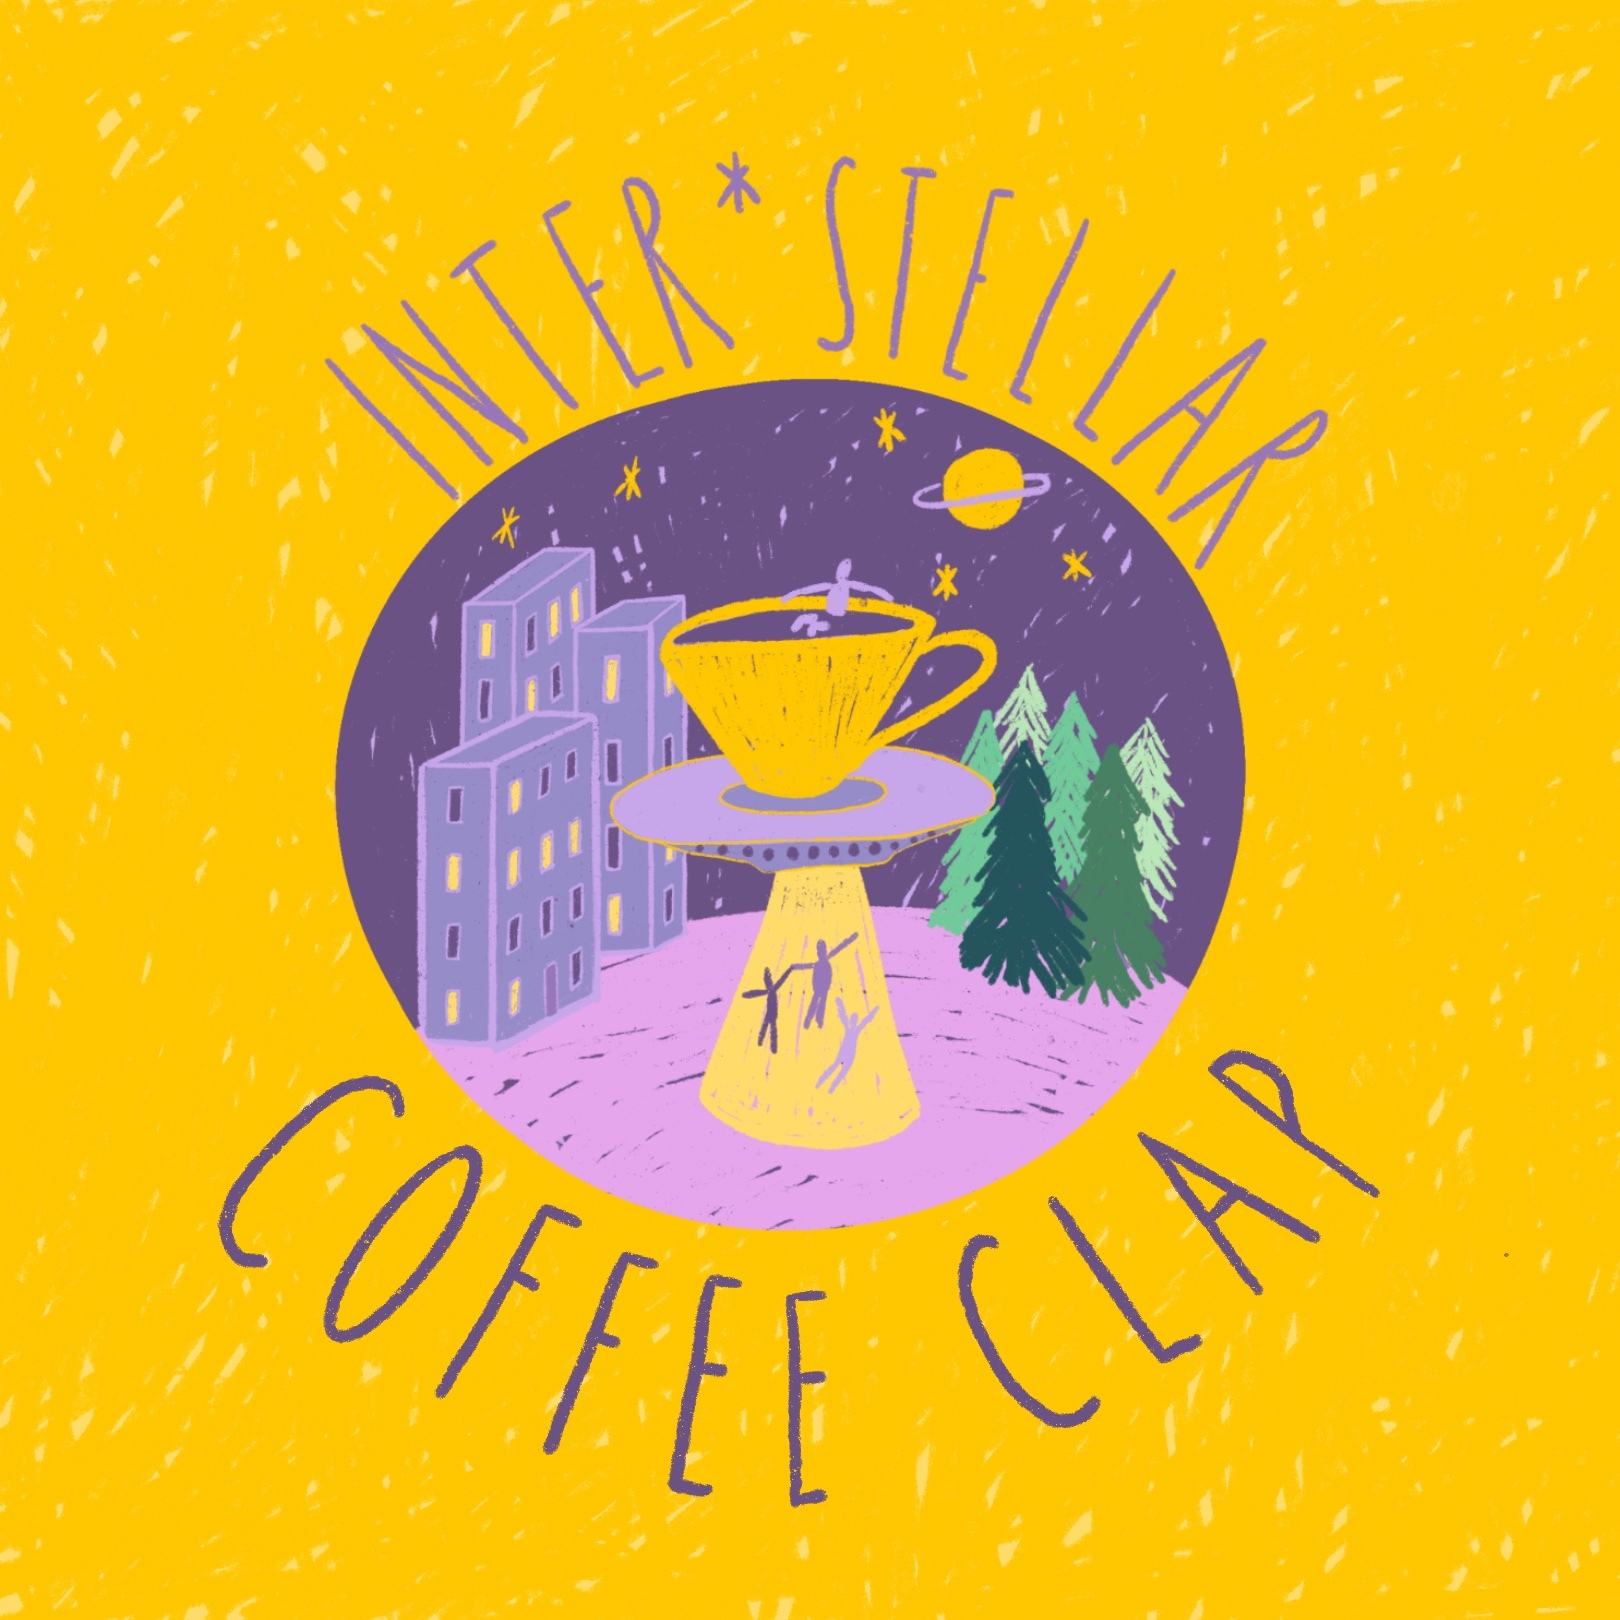 Join our next inter*stellar Coffee Clap!